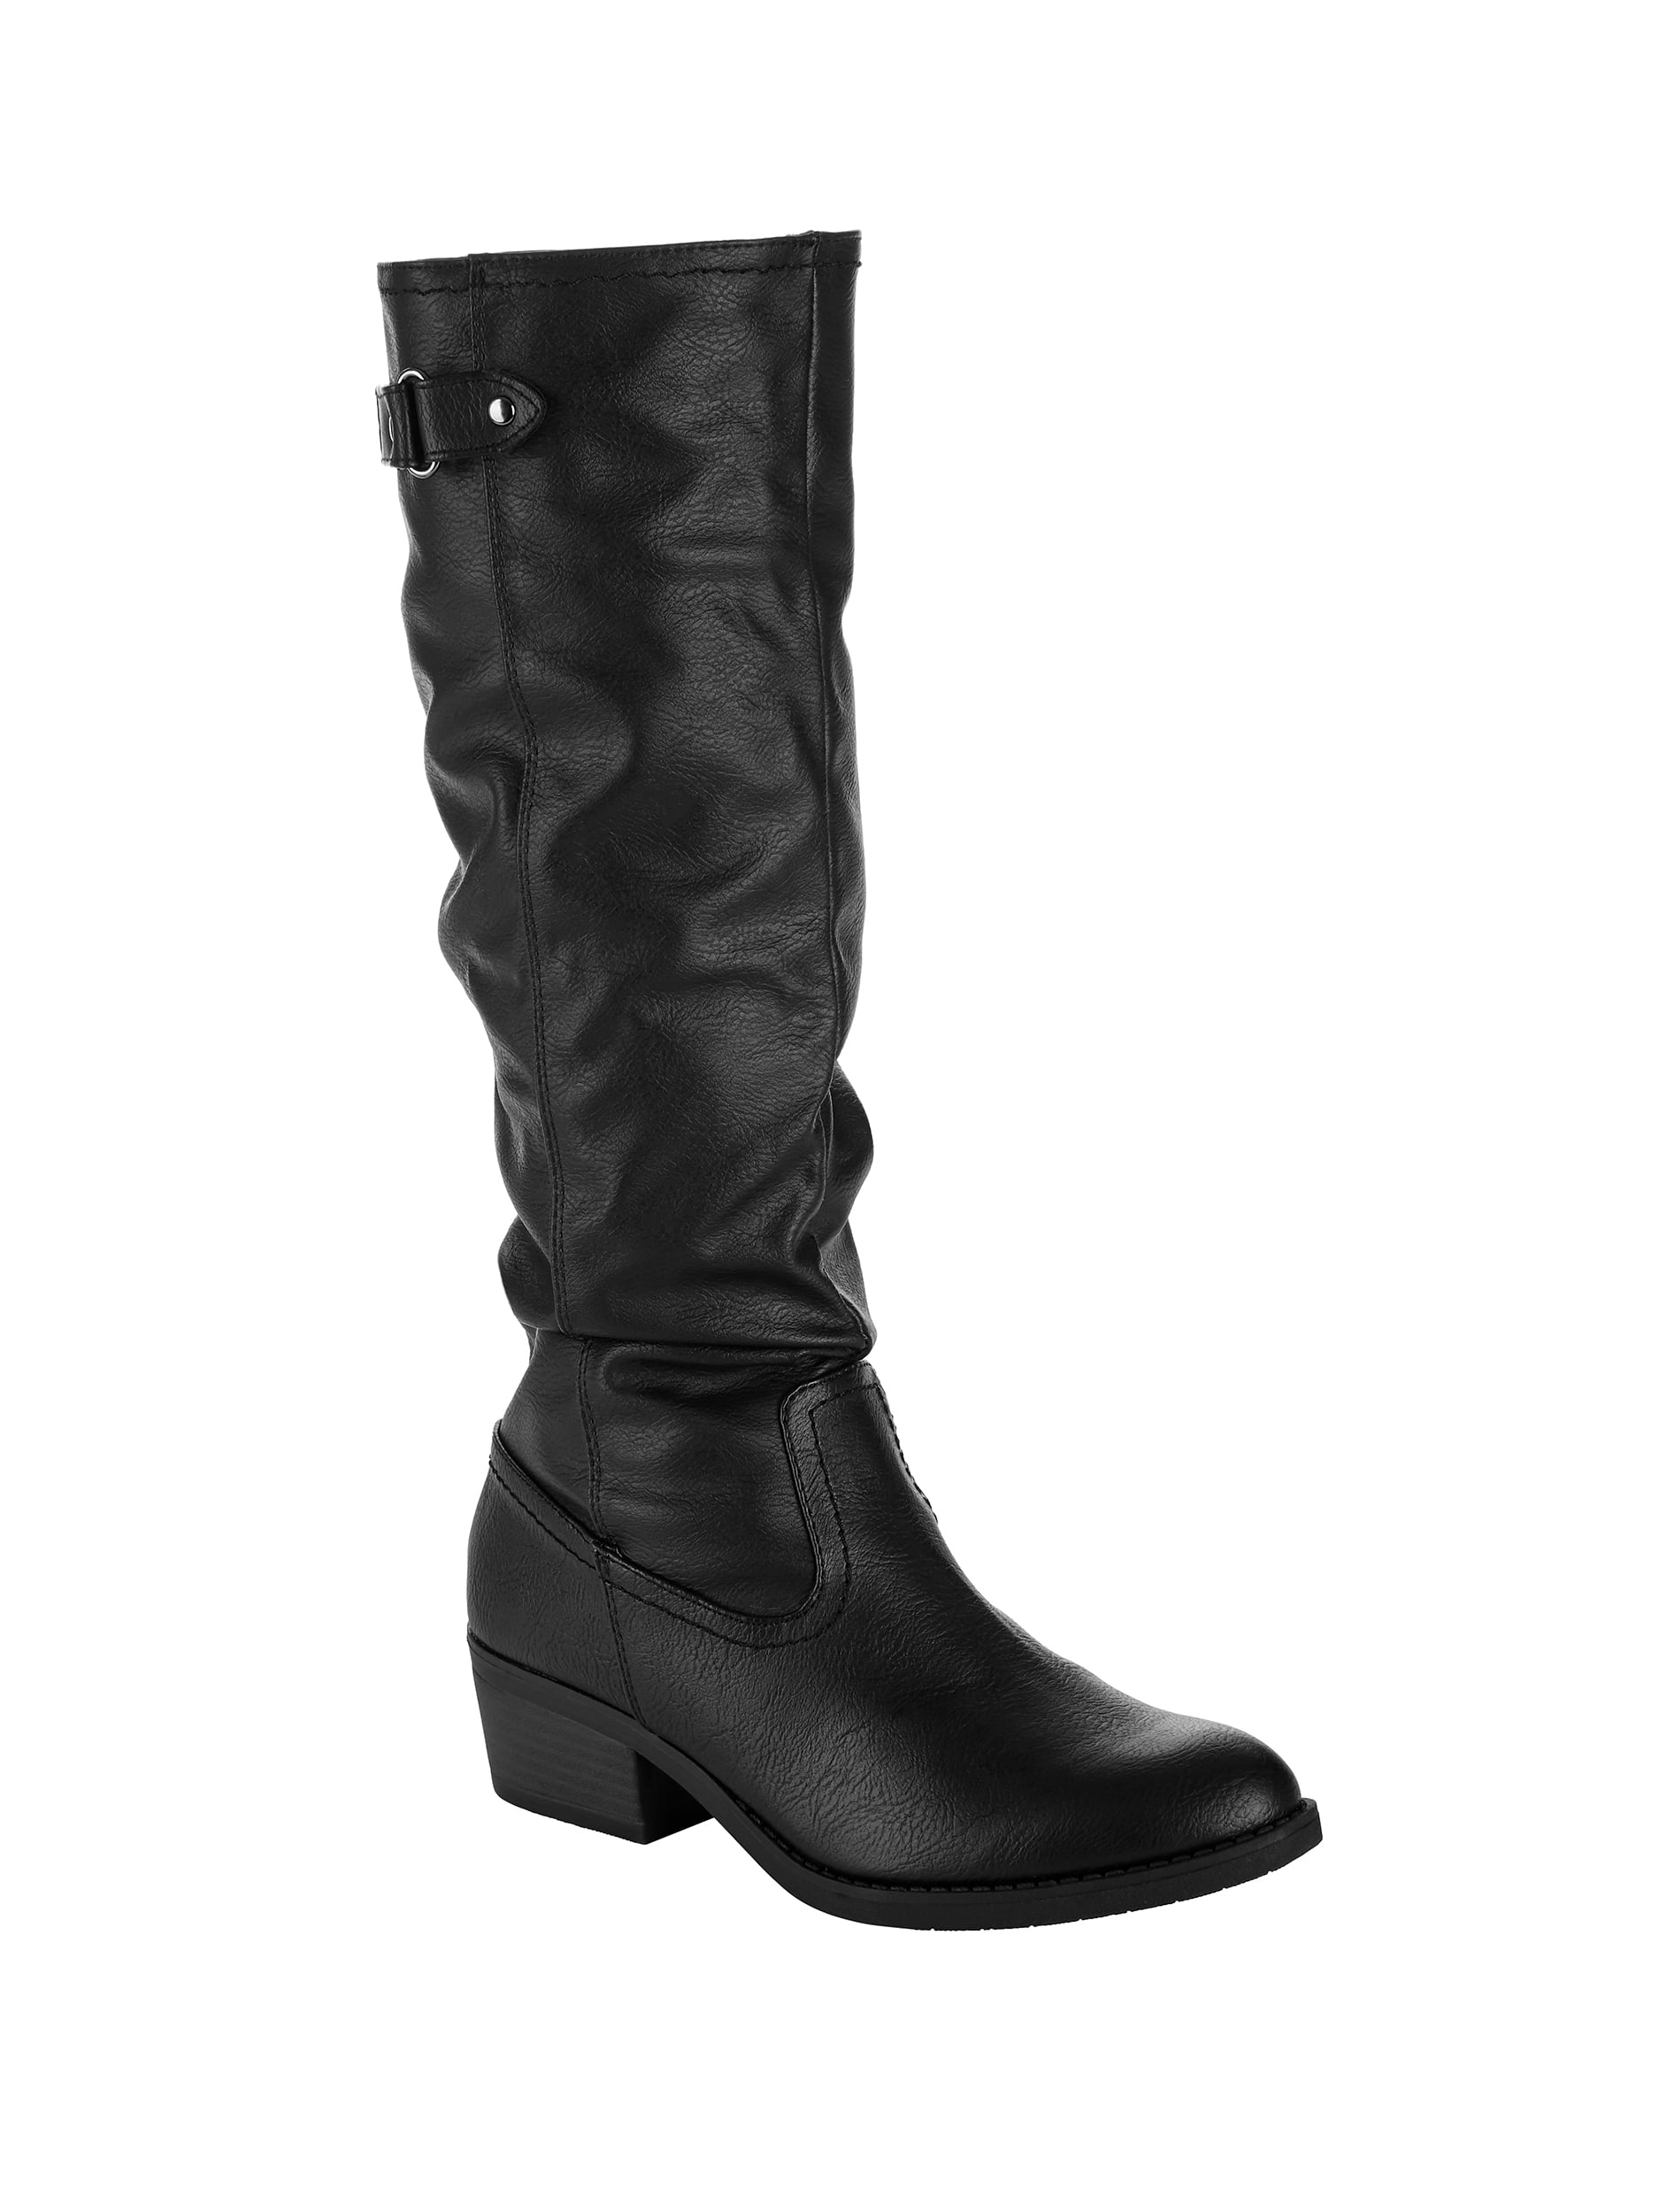 Women's Time and Tru Tall Slouch Winter Black Boot